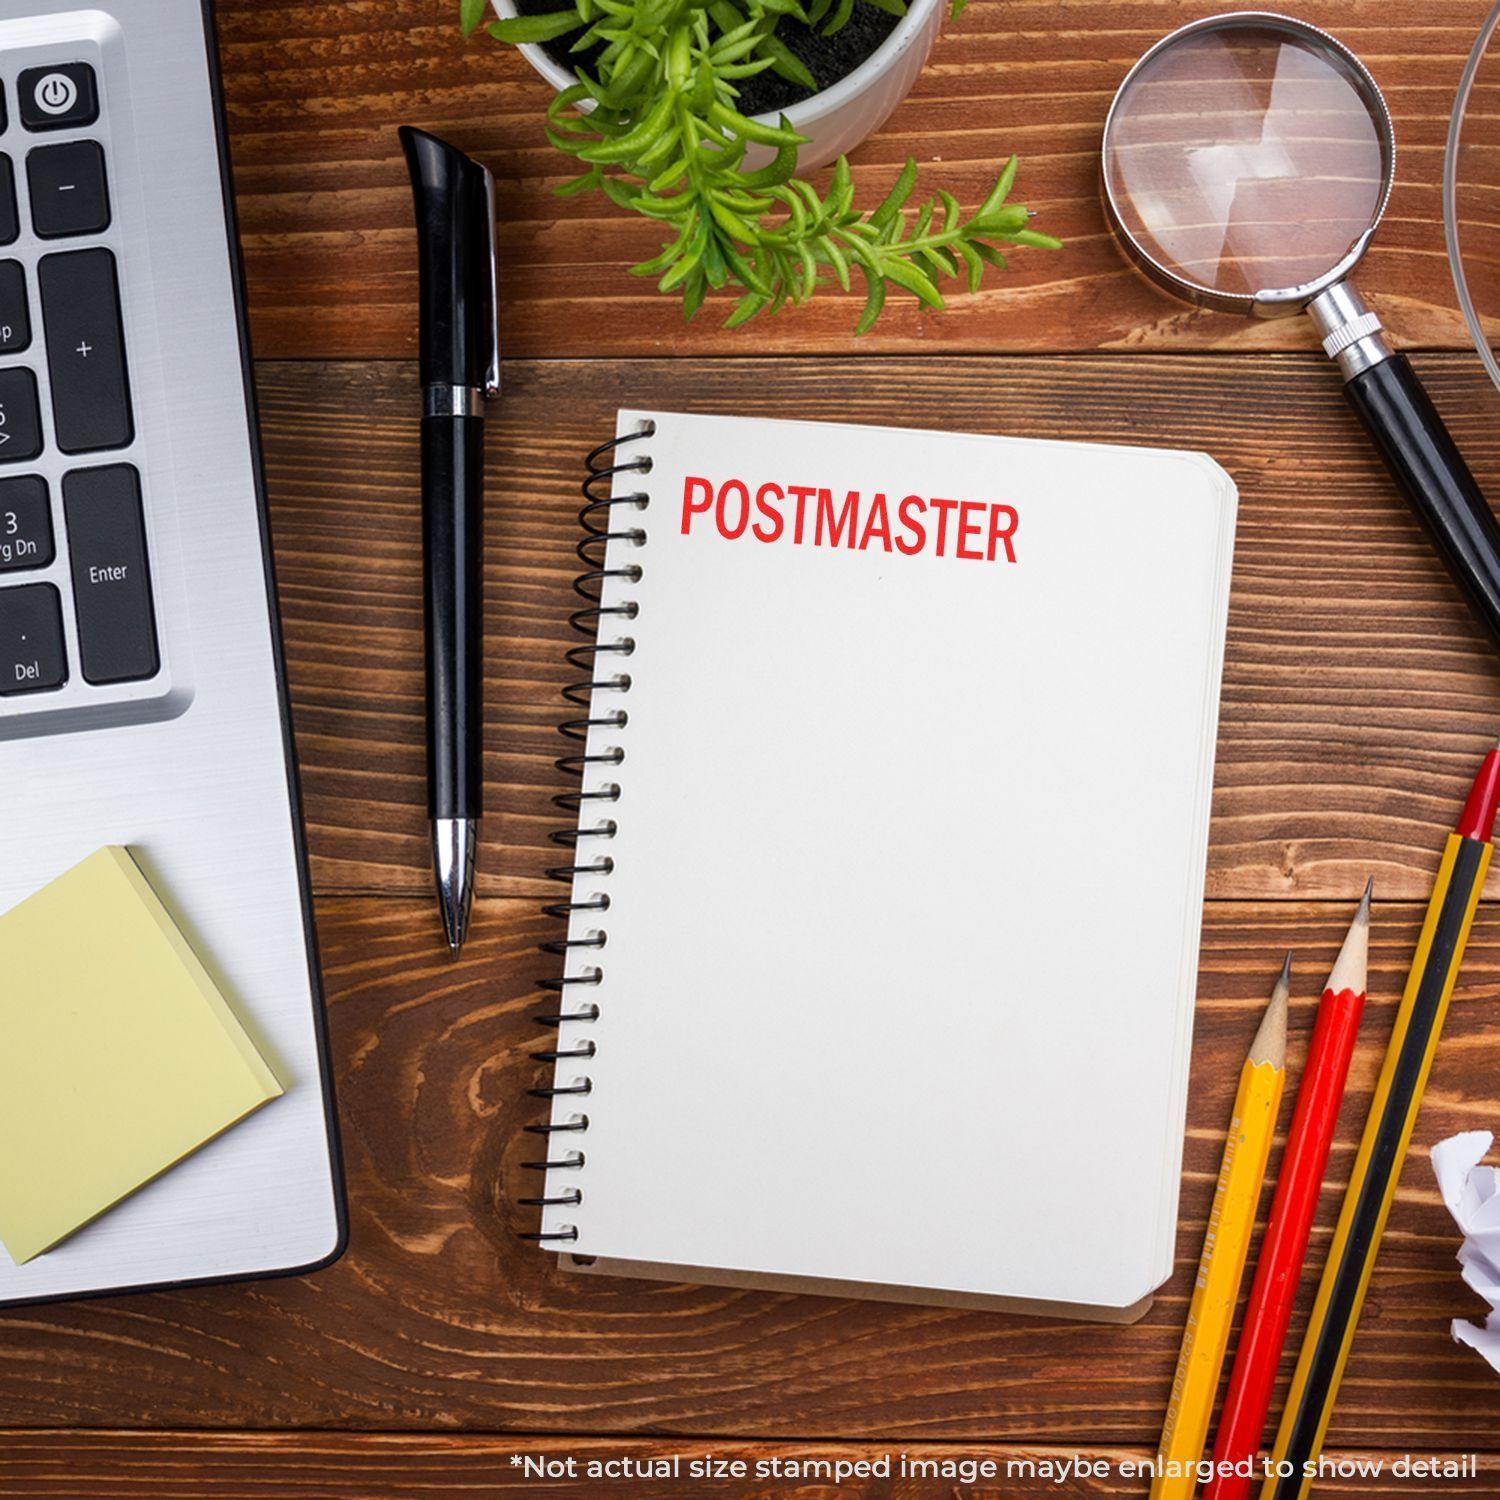 A stock office rubber stamp with a stamped image showing how the text "POSTMASTER" in a large font is displayed after stamping.